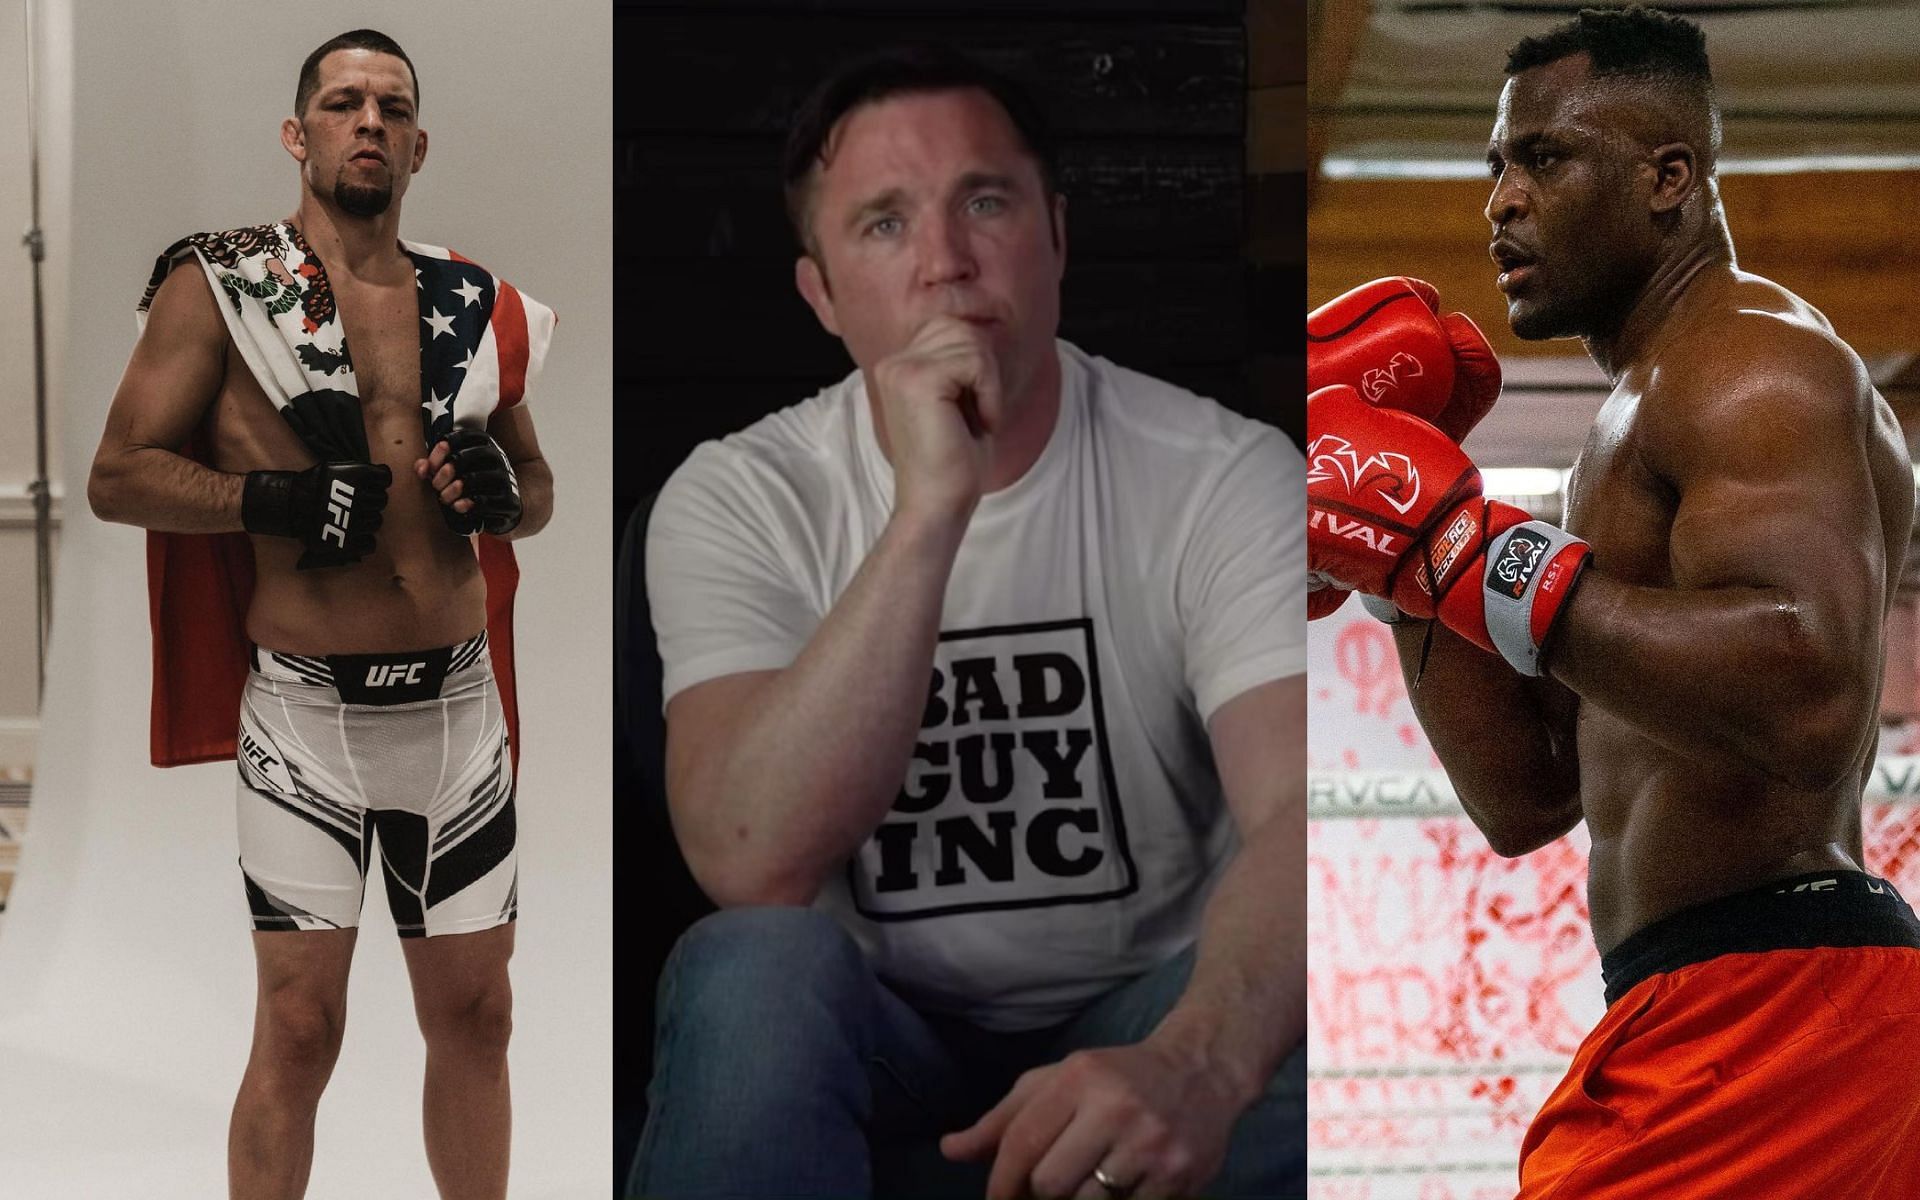 Nate Diaz (Left), Chael Sonnen (Center), and Francis Ngannou (Right) [Images via @road2war, @sonnench and @francisngannou on Instagram]